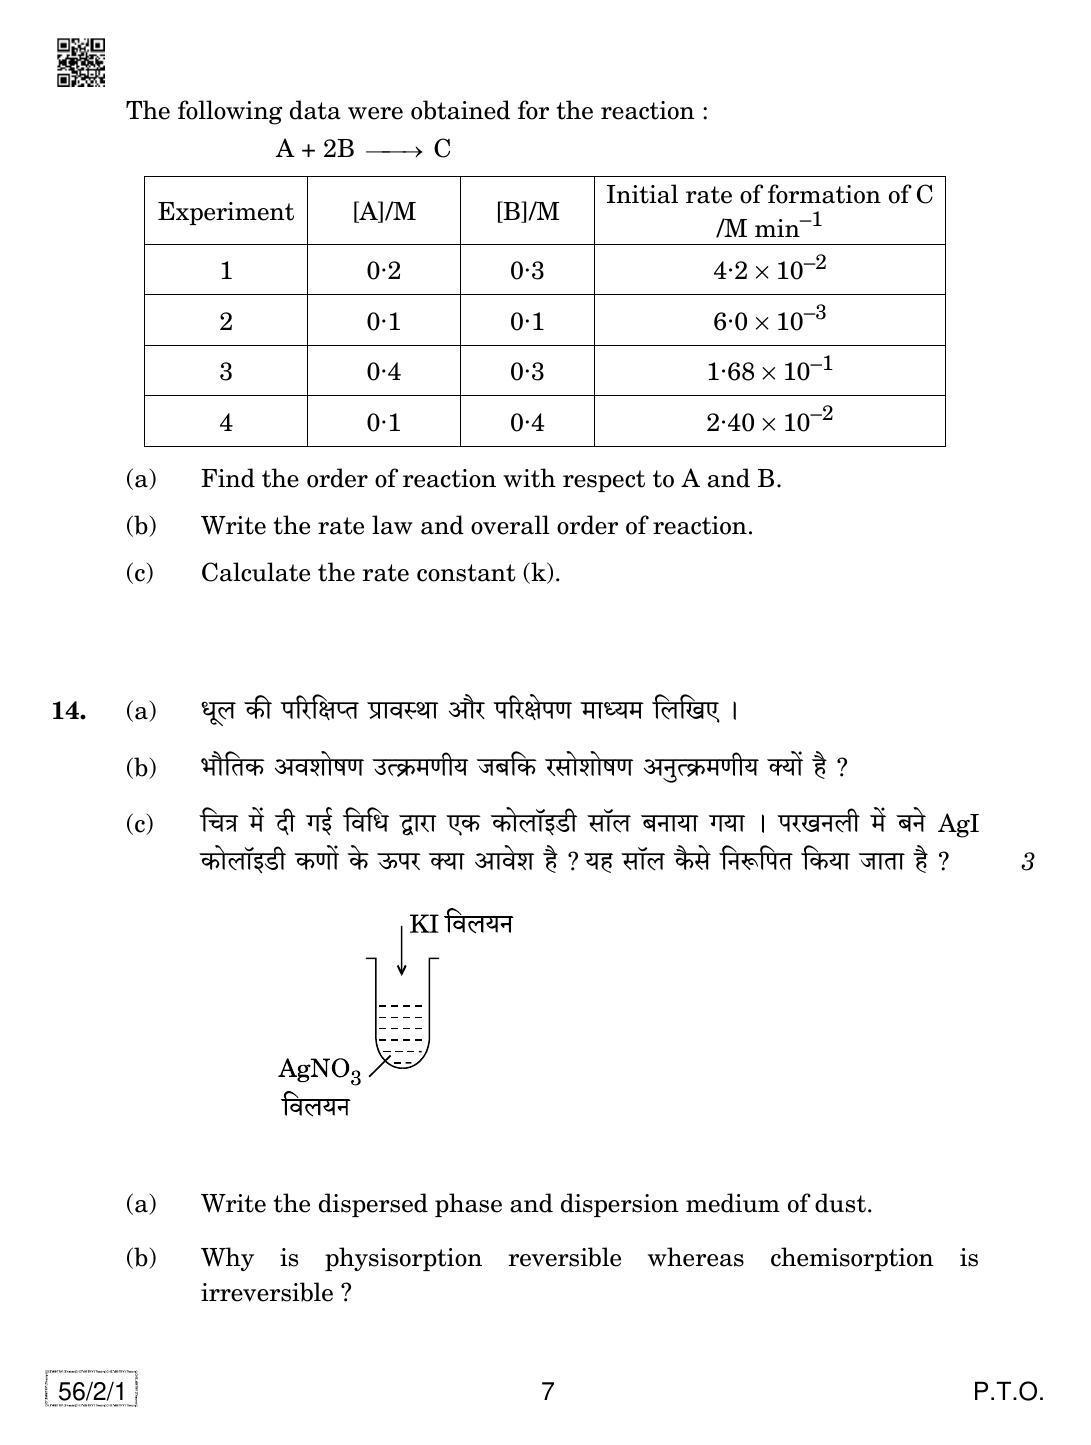 CBSE Class 12 56-2-1 Chemistry 2019 Question Paper - Page 7